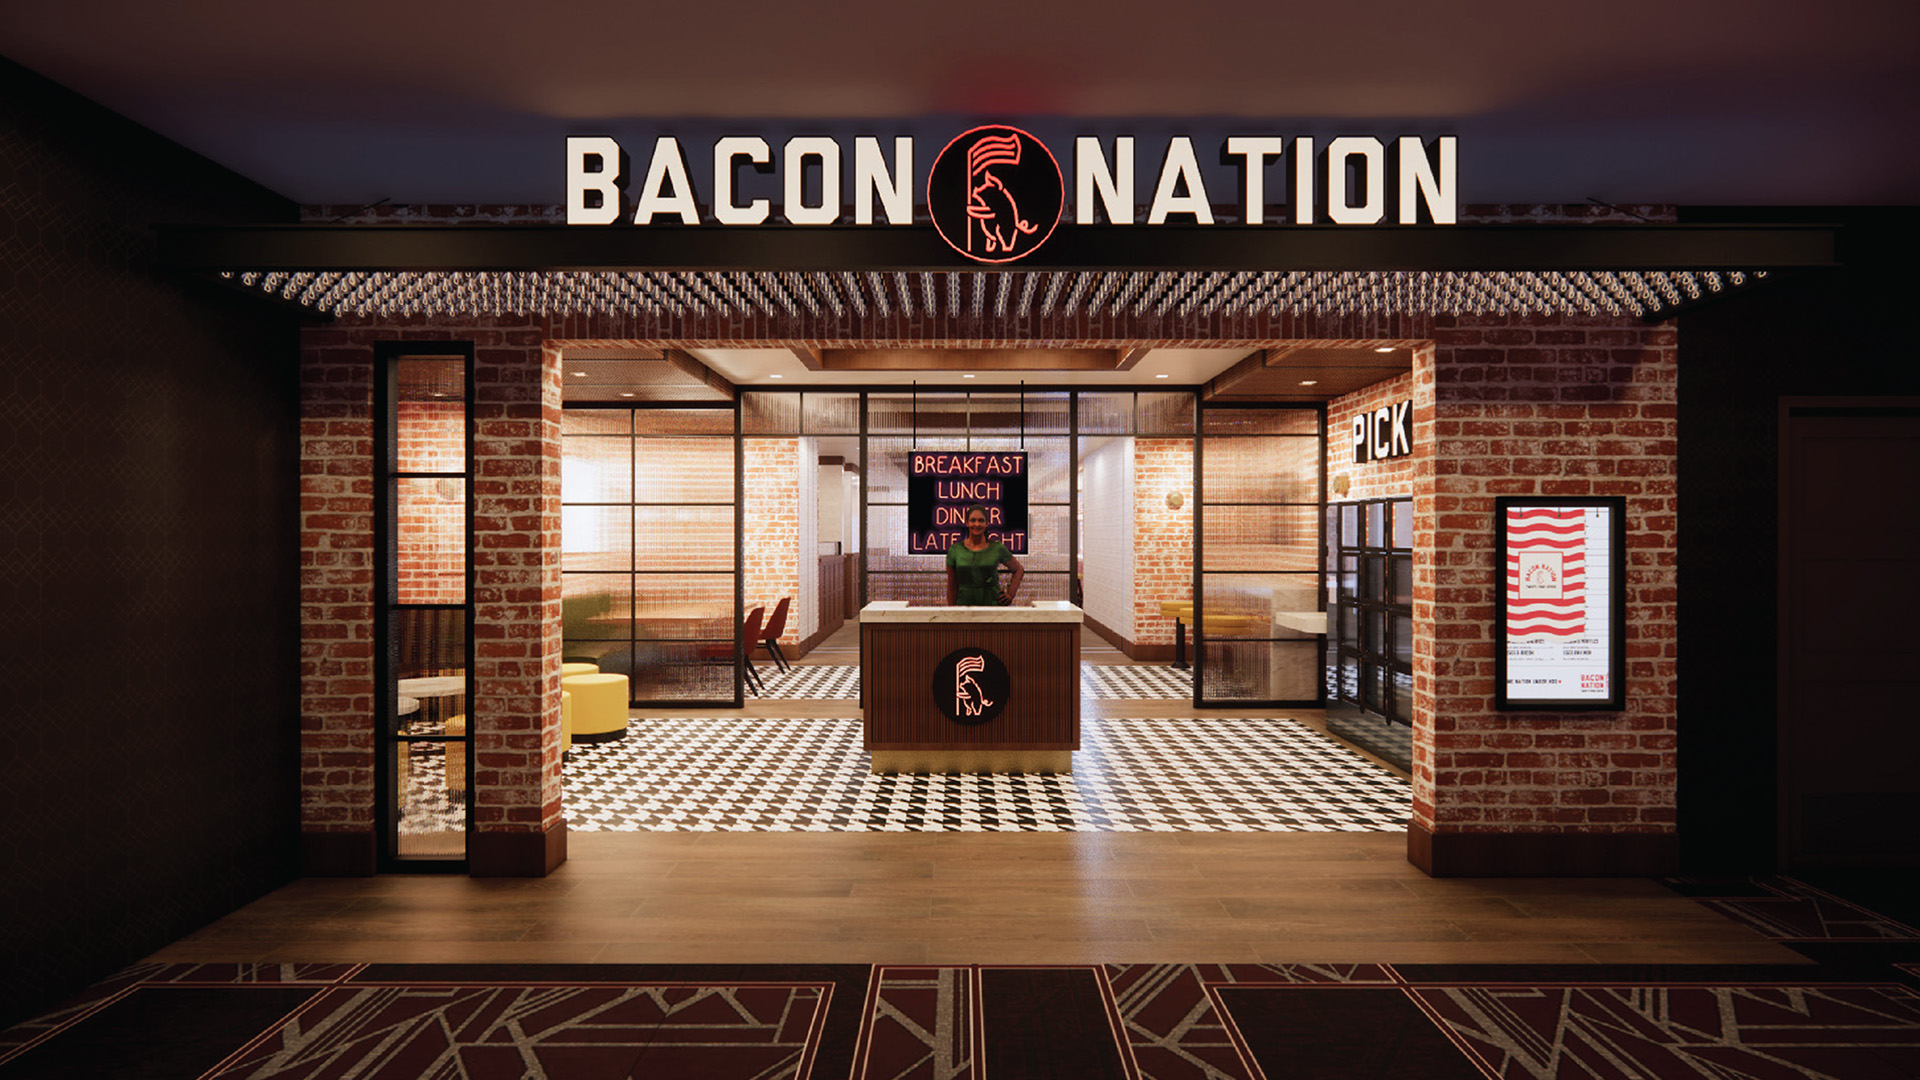 A rendering of a restaurant entry with “Bacon Nation” in larger letters above the door